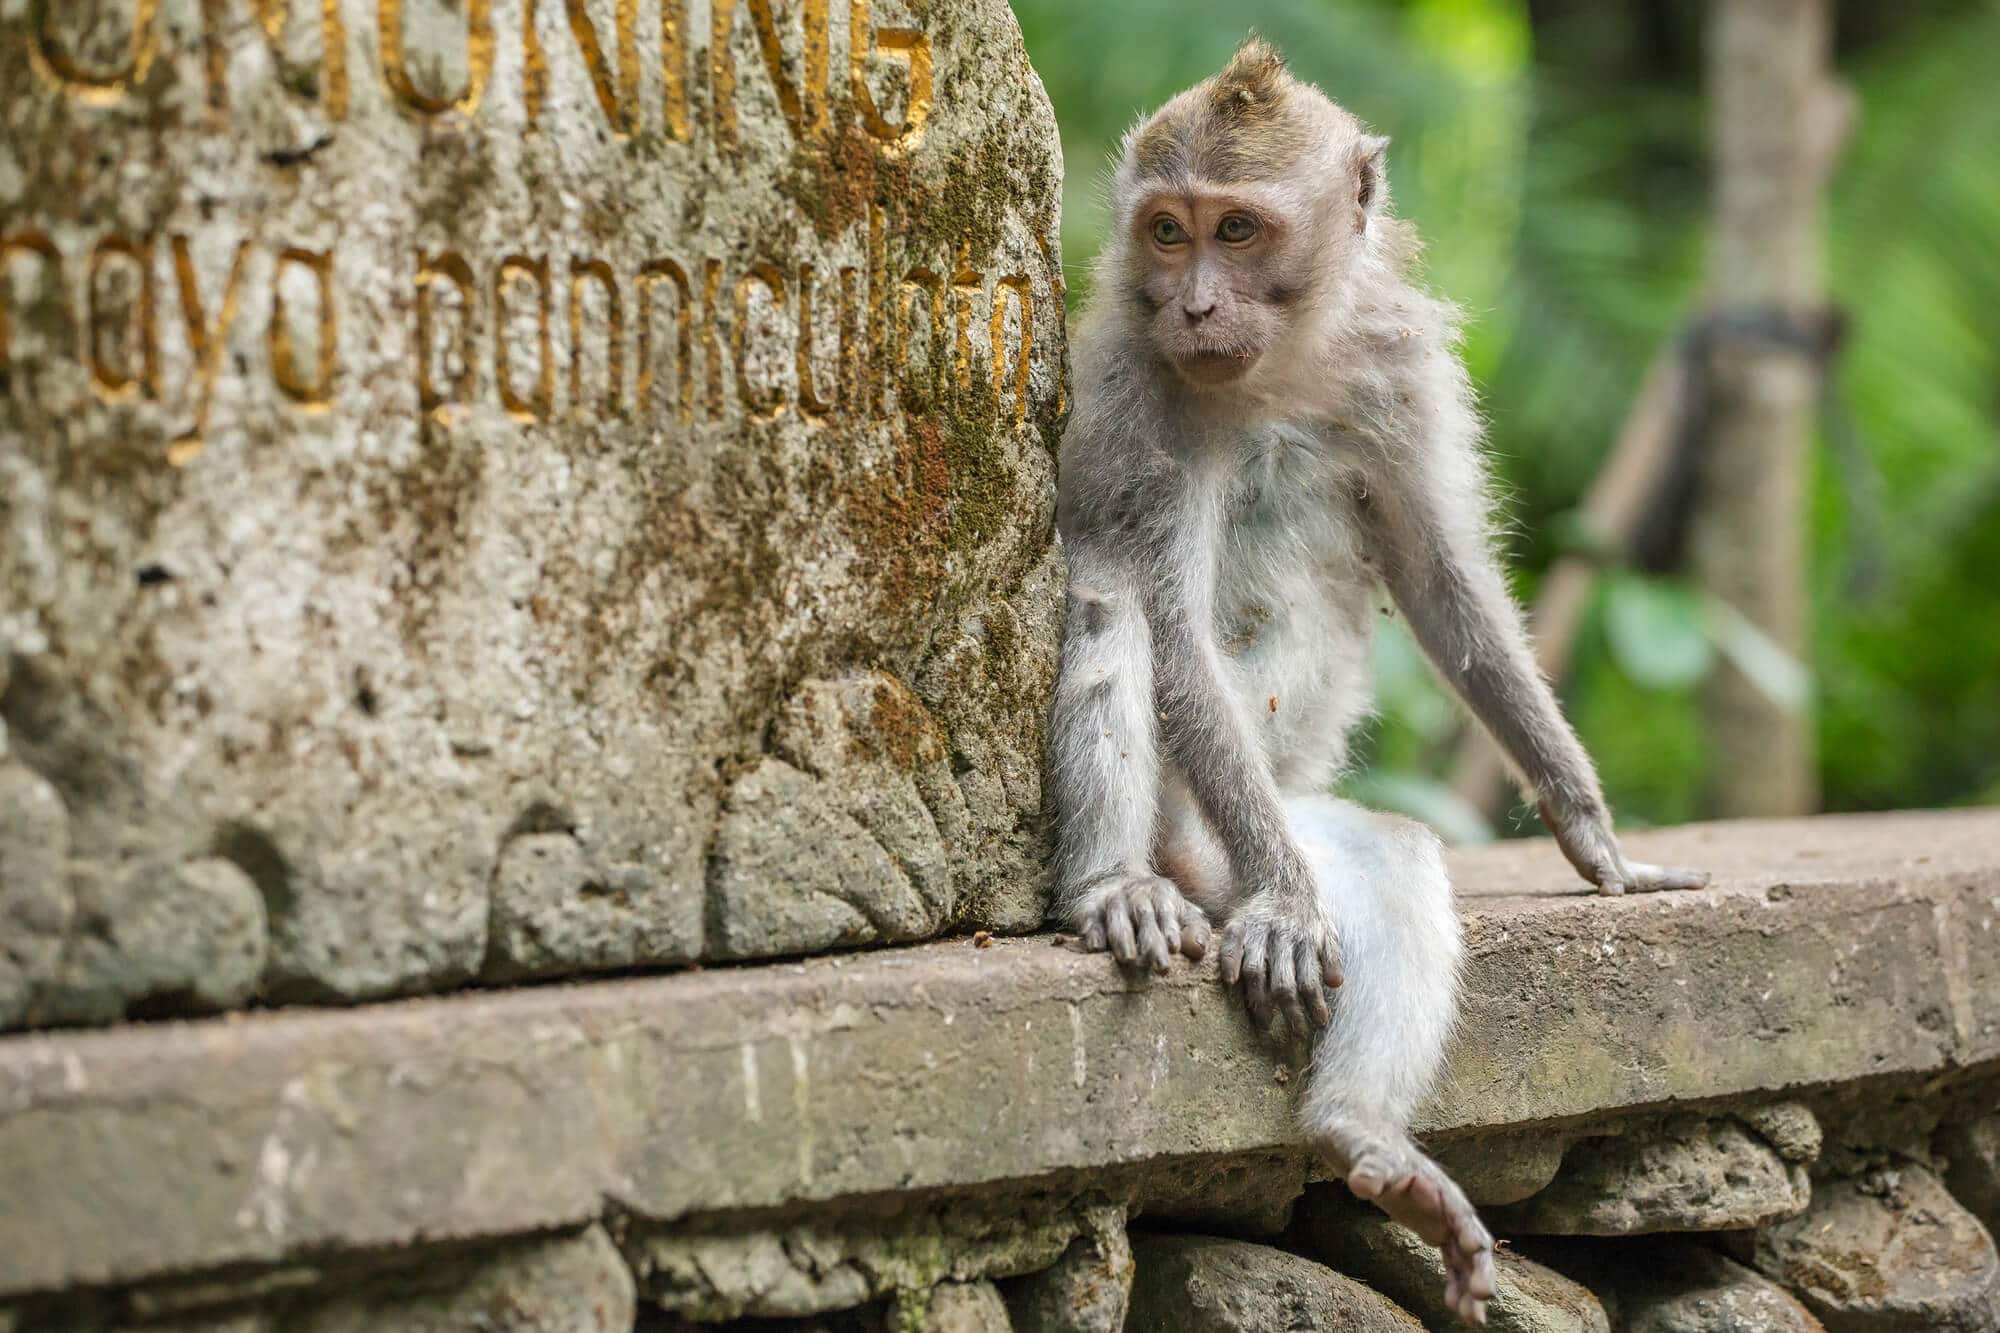 Small monkey sitting next to a stone sign at Alas Kedaton Monkey Forest. One of the best places to see monkeys in Bali